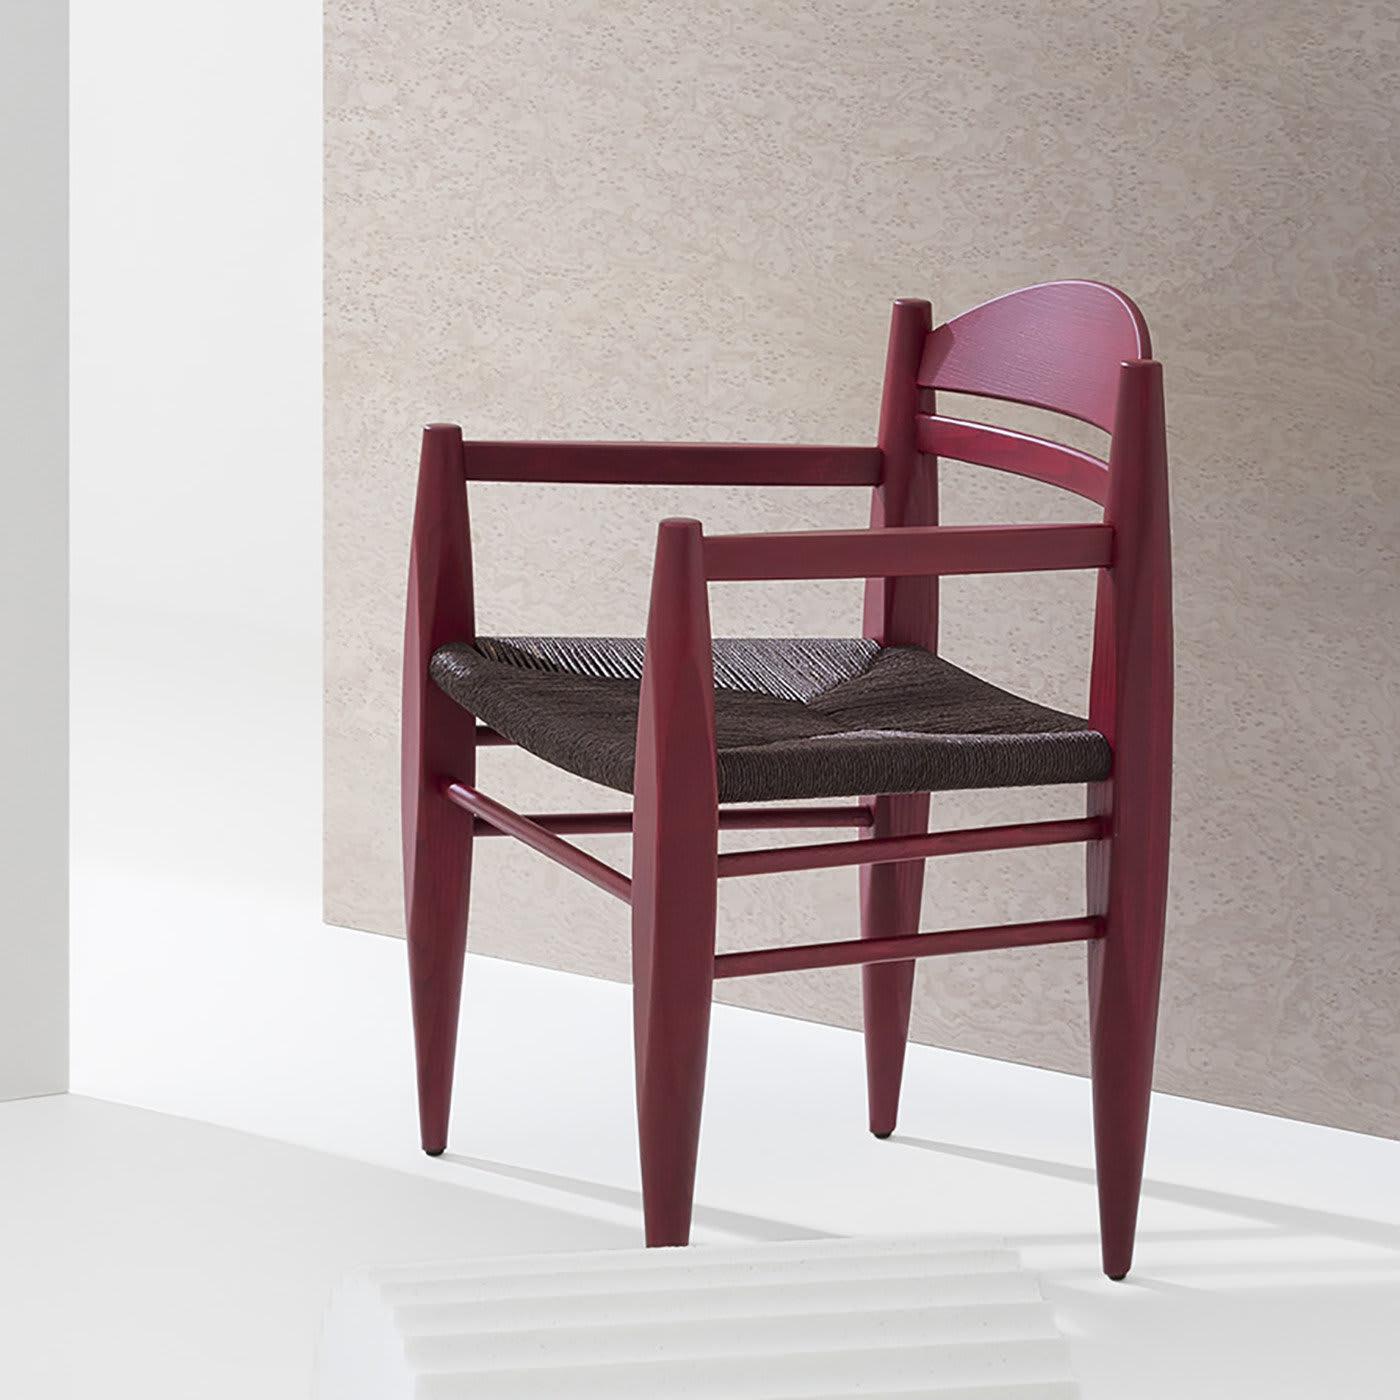 This exclusive chair will add a glamorous accent to any decor with its vintage-inspired design enlivened by a seductive color combination. The anthracite gray hue of the ropes covering the 47-high seat creates a superb chromatic contrast with the